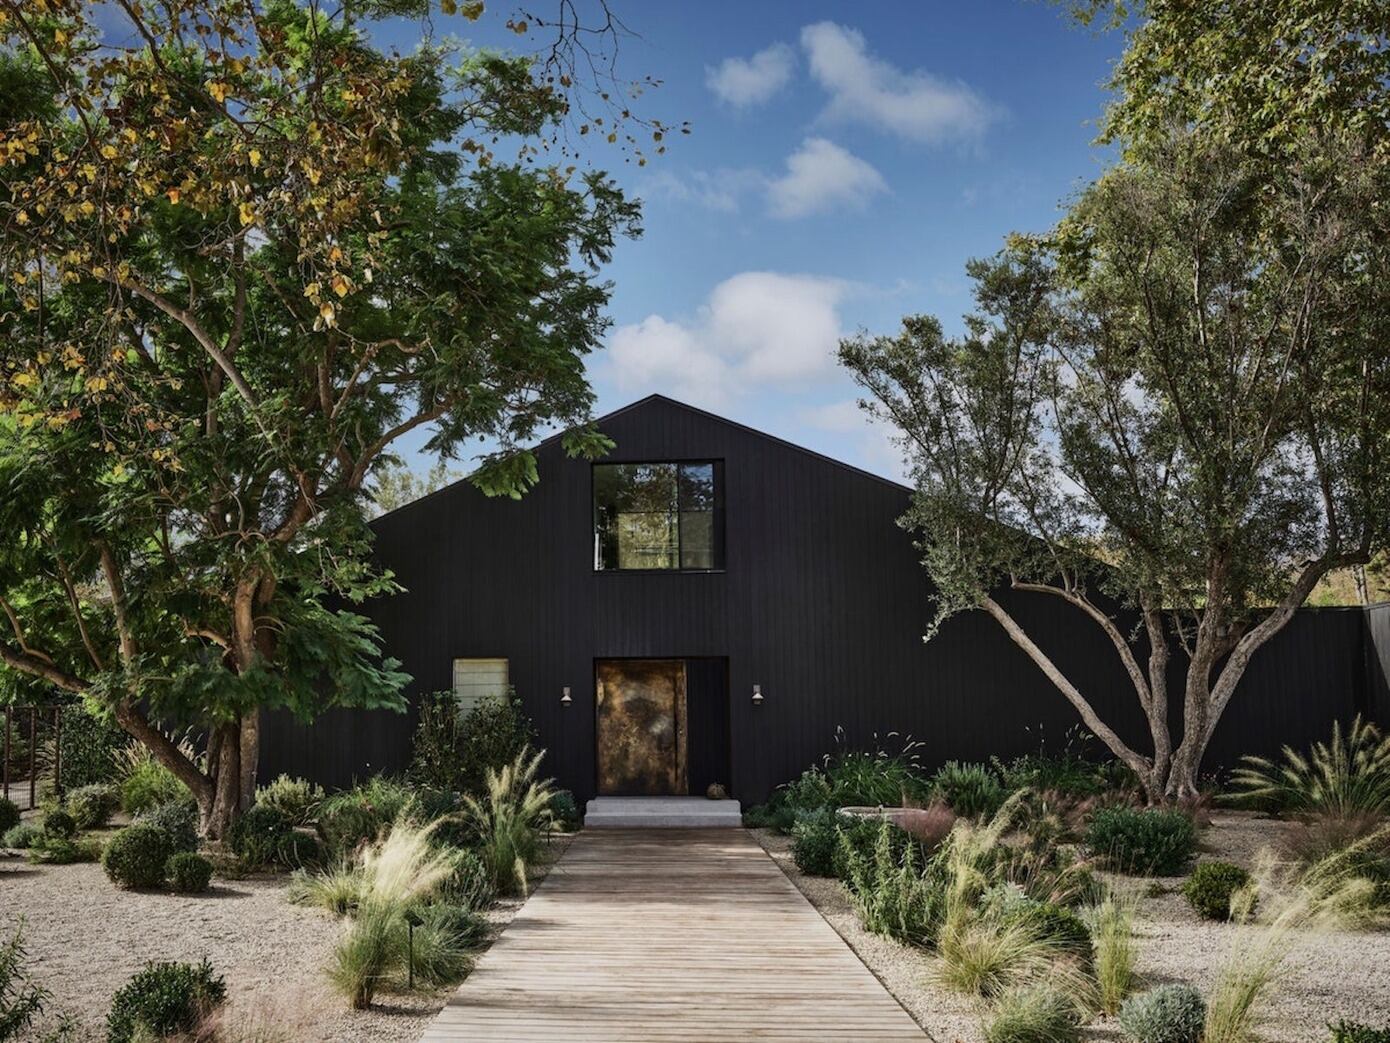 Home of the Week: A modern farmhouse with a backyard oasis in